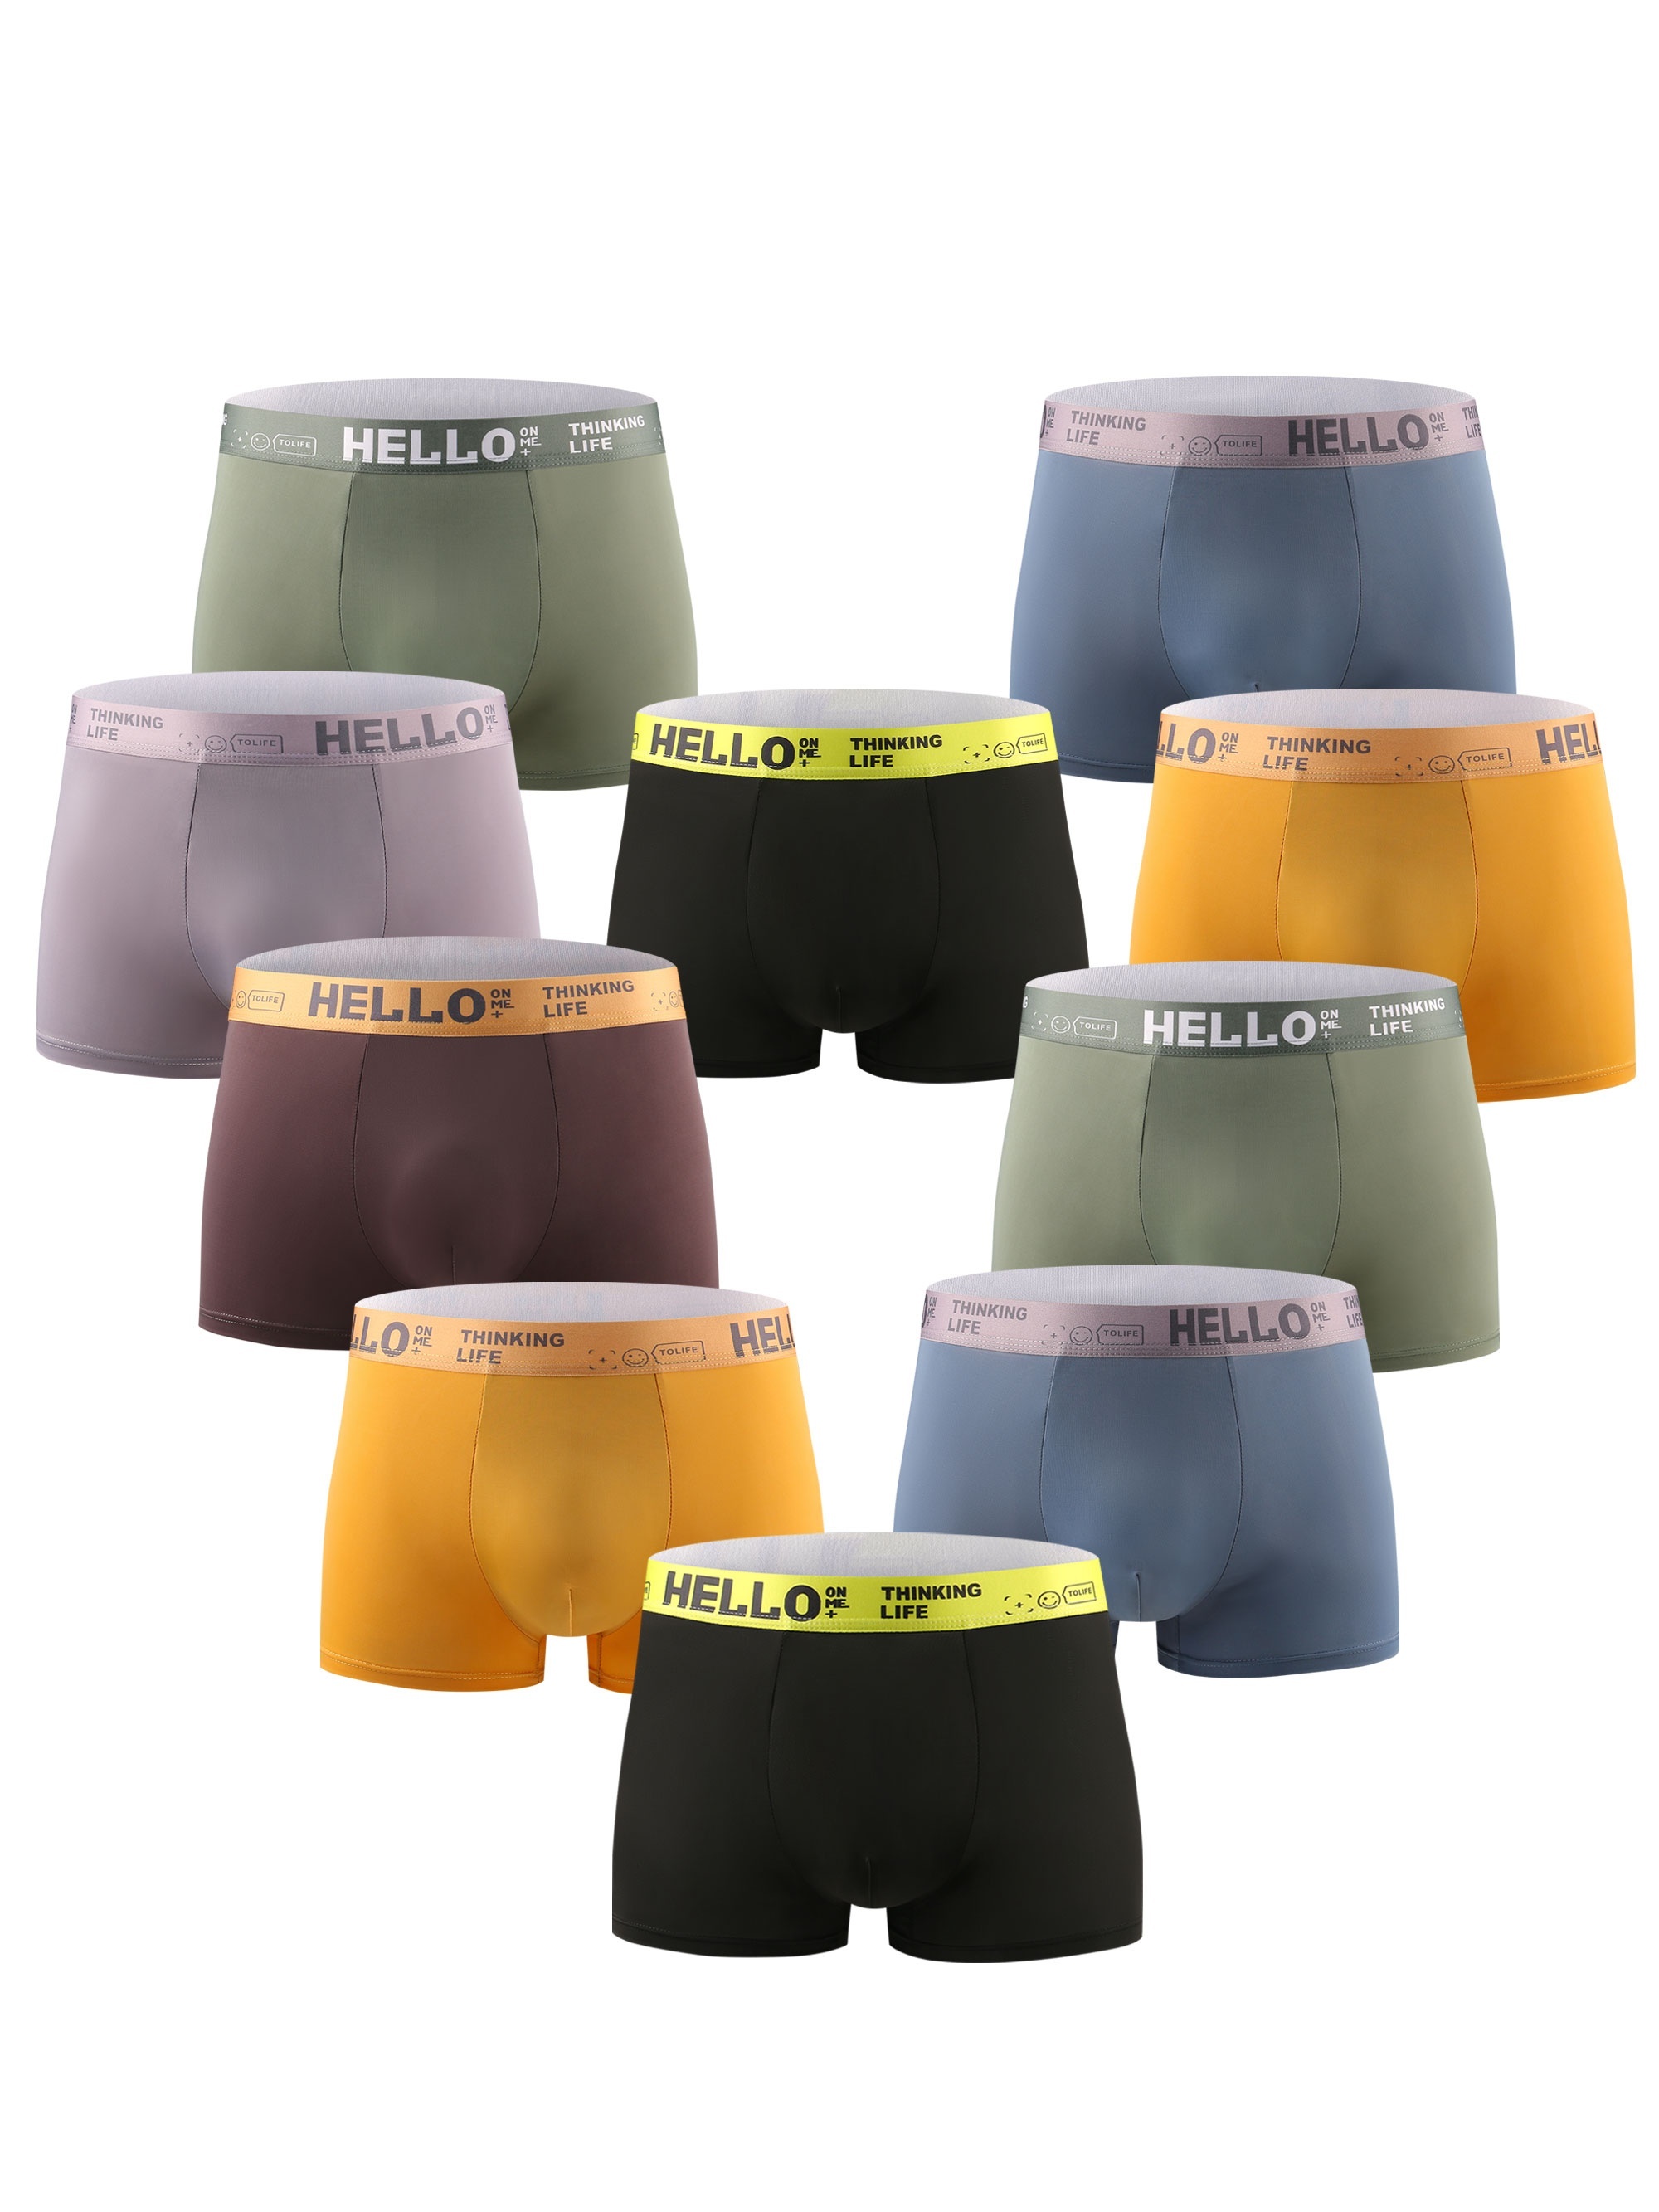 10 Pcs Of 'Hello' Men's Ice Silk Boxer Briefs, Breathable, Quick Drying,  Comfortable, Elastic Underwear, Simple And Fashionable Men's Underwear